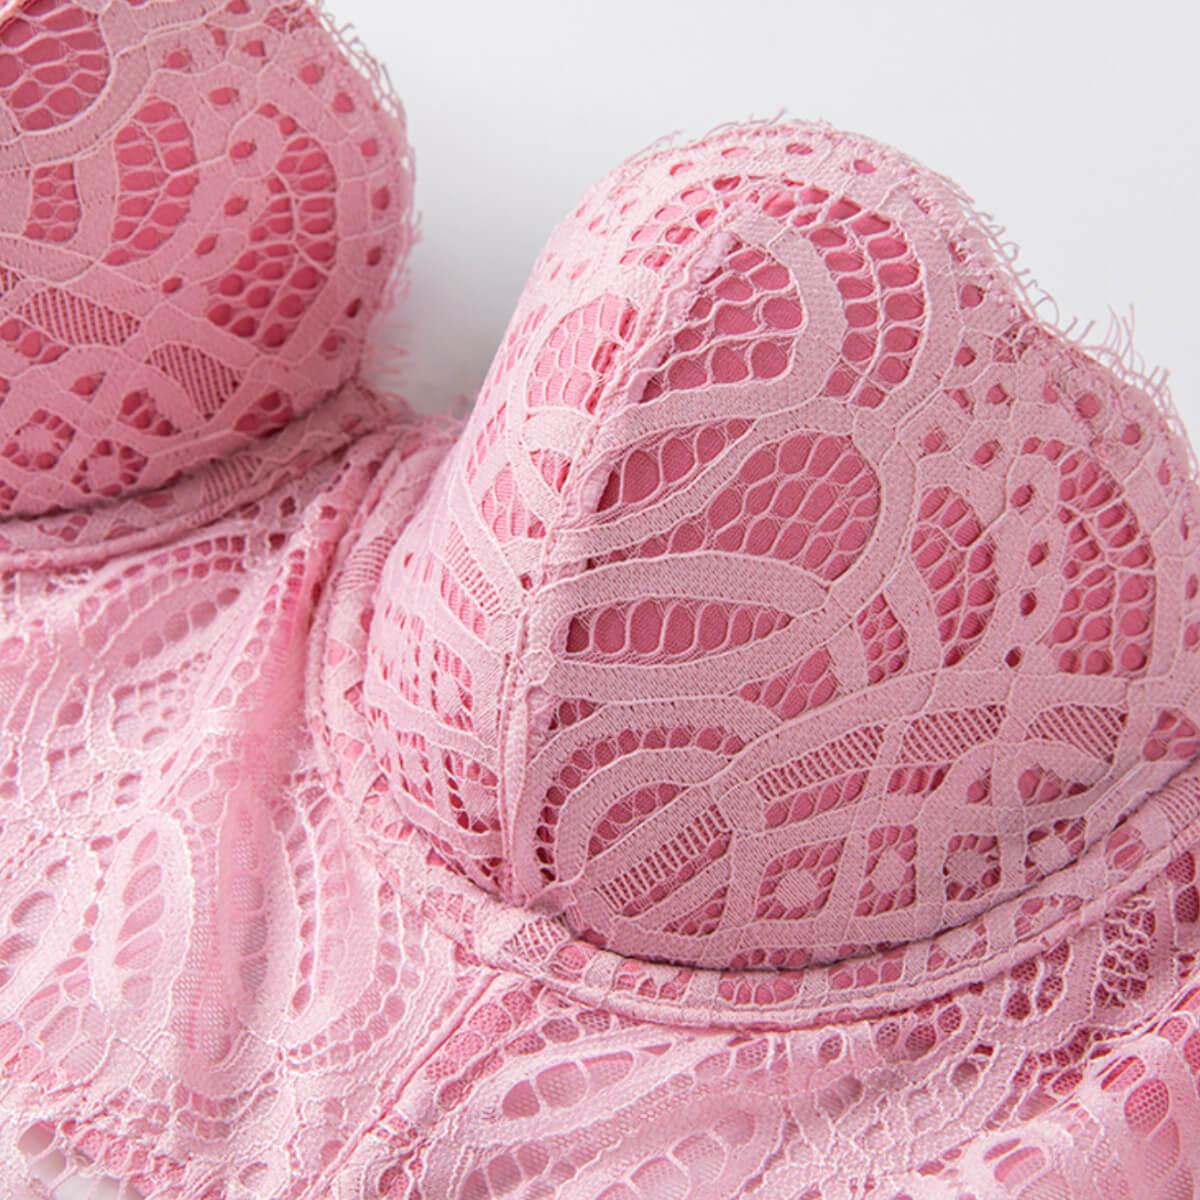 Xhilaration Pink All over Lace Strapless Bra 32B Neon Size undefined - $9 -  From Meagan